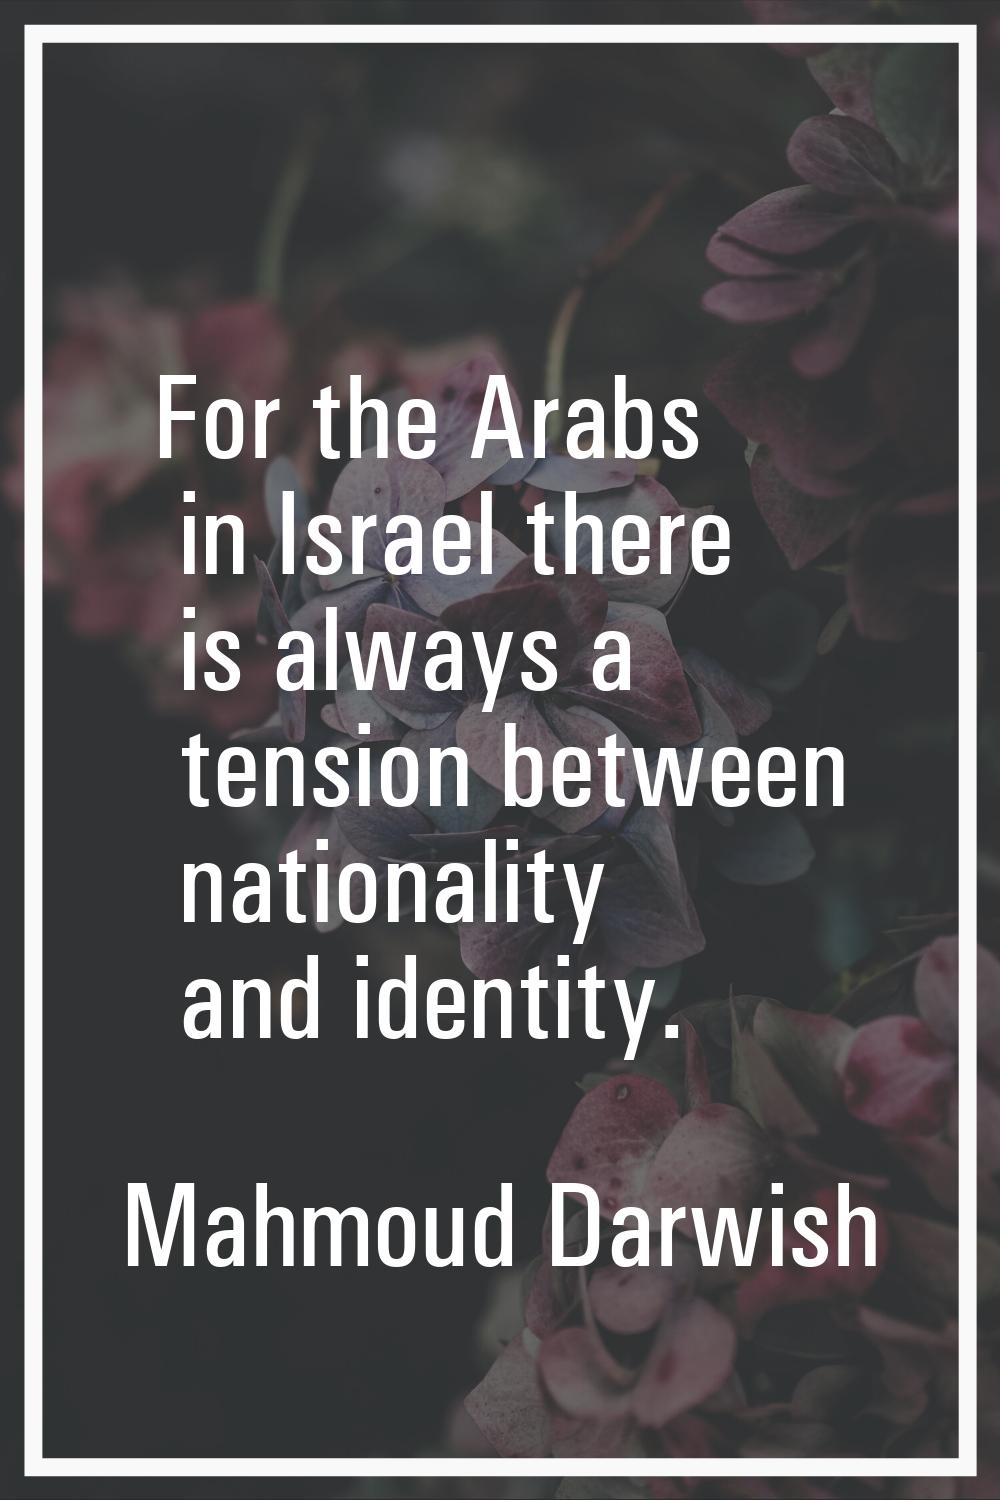 For the Arabs in Israel there is always a tension between nationality and identity.